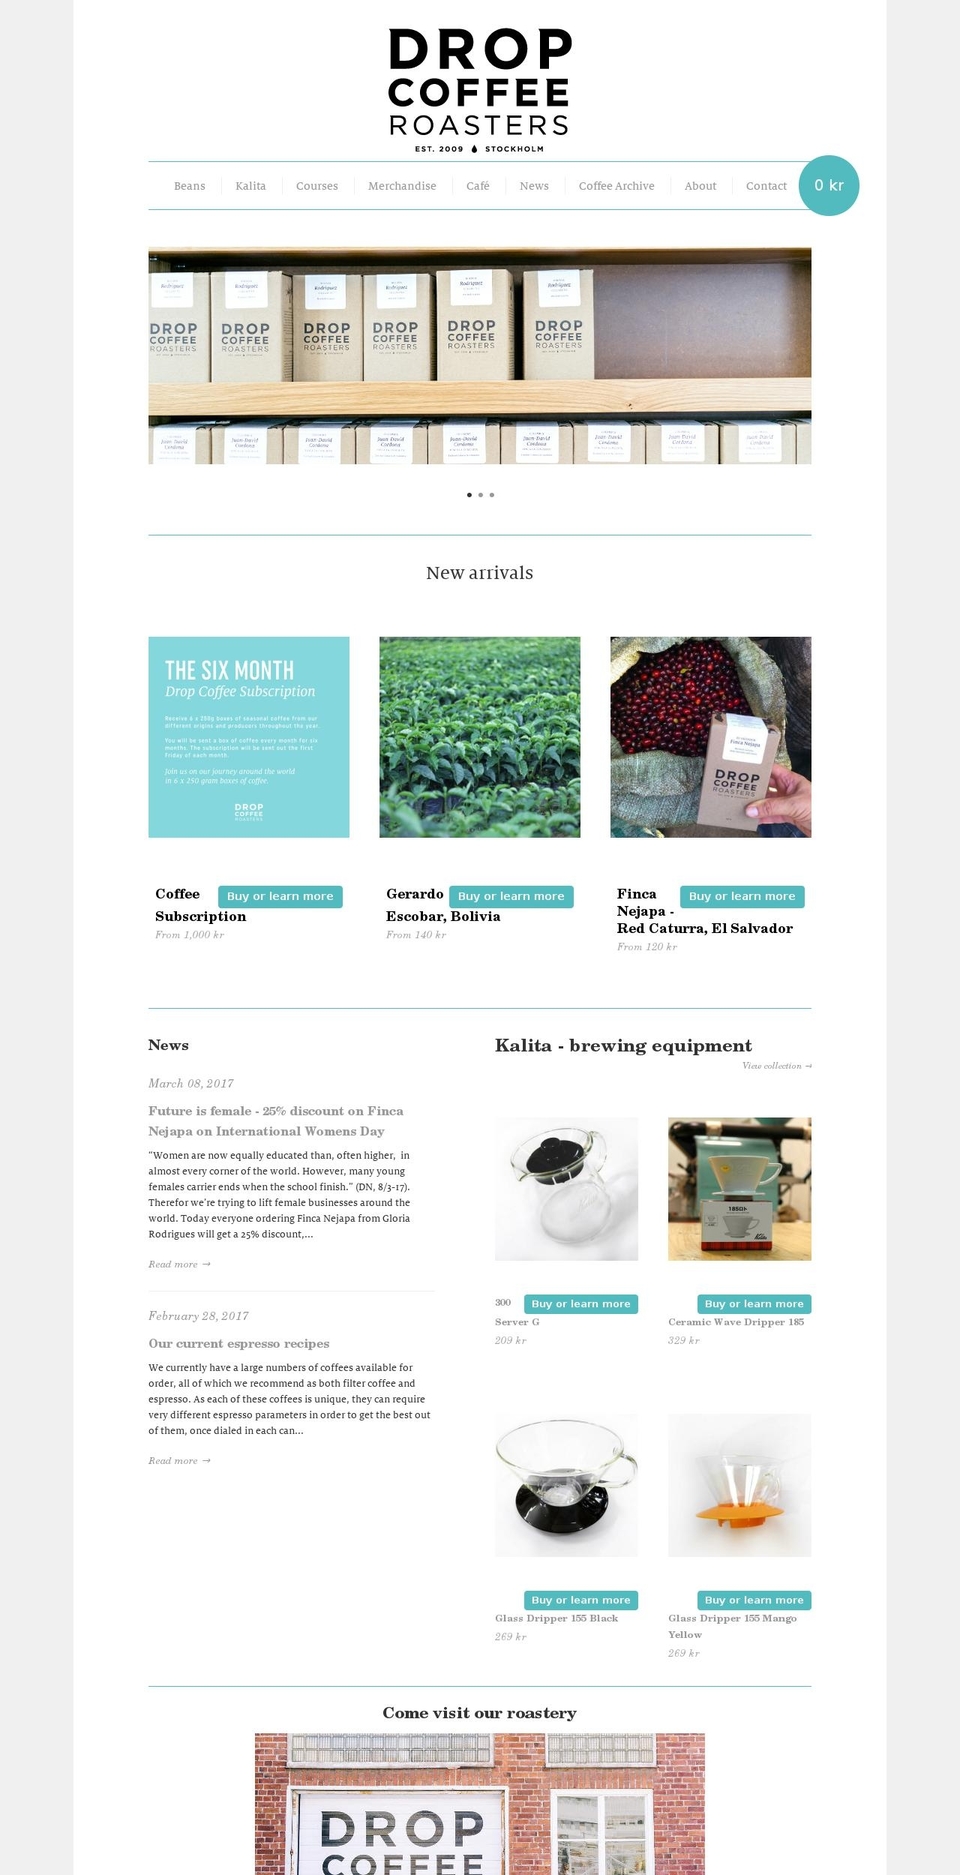 Wholesale Shopify theme site example dropcoffee.com